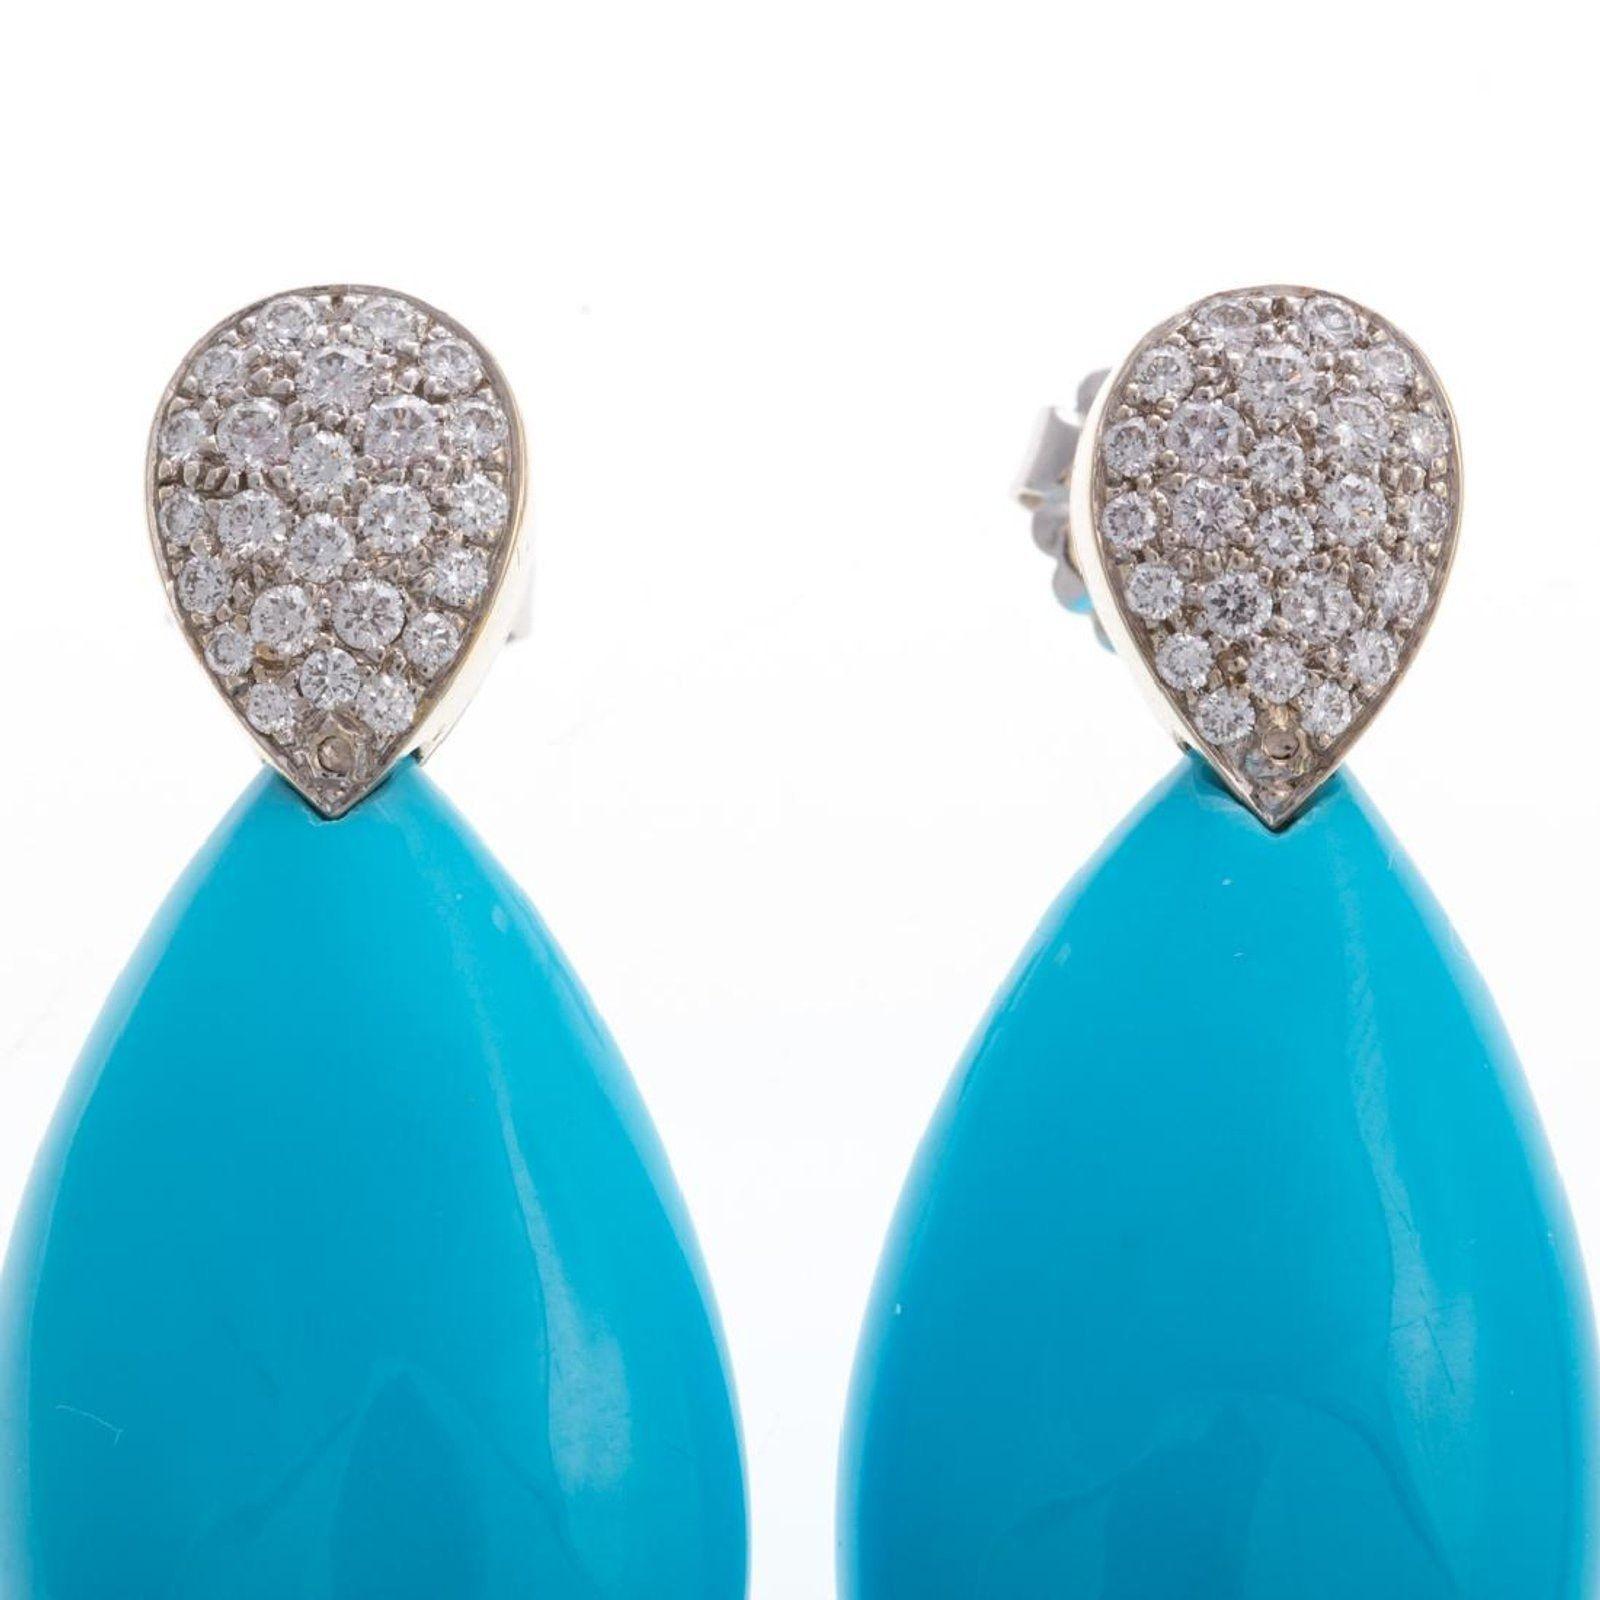 18K white gold earrings by Gump's featuring 2 well matched pear shape sleeping beauty Persian turquoise measuring 20 mm x 37 mm at the bottom of the earrings. Adorned with full cut diamonds weighing 1.18 carat, pave set in a pear shape at the top of